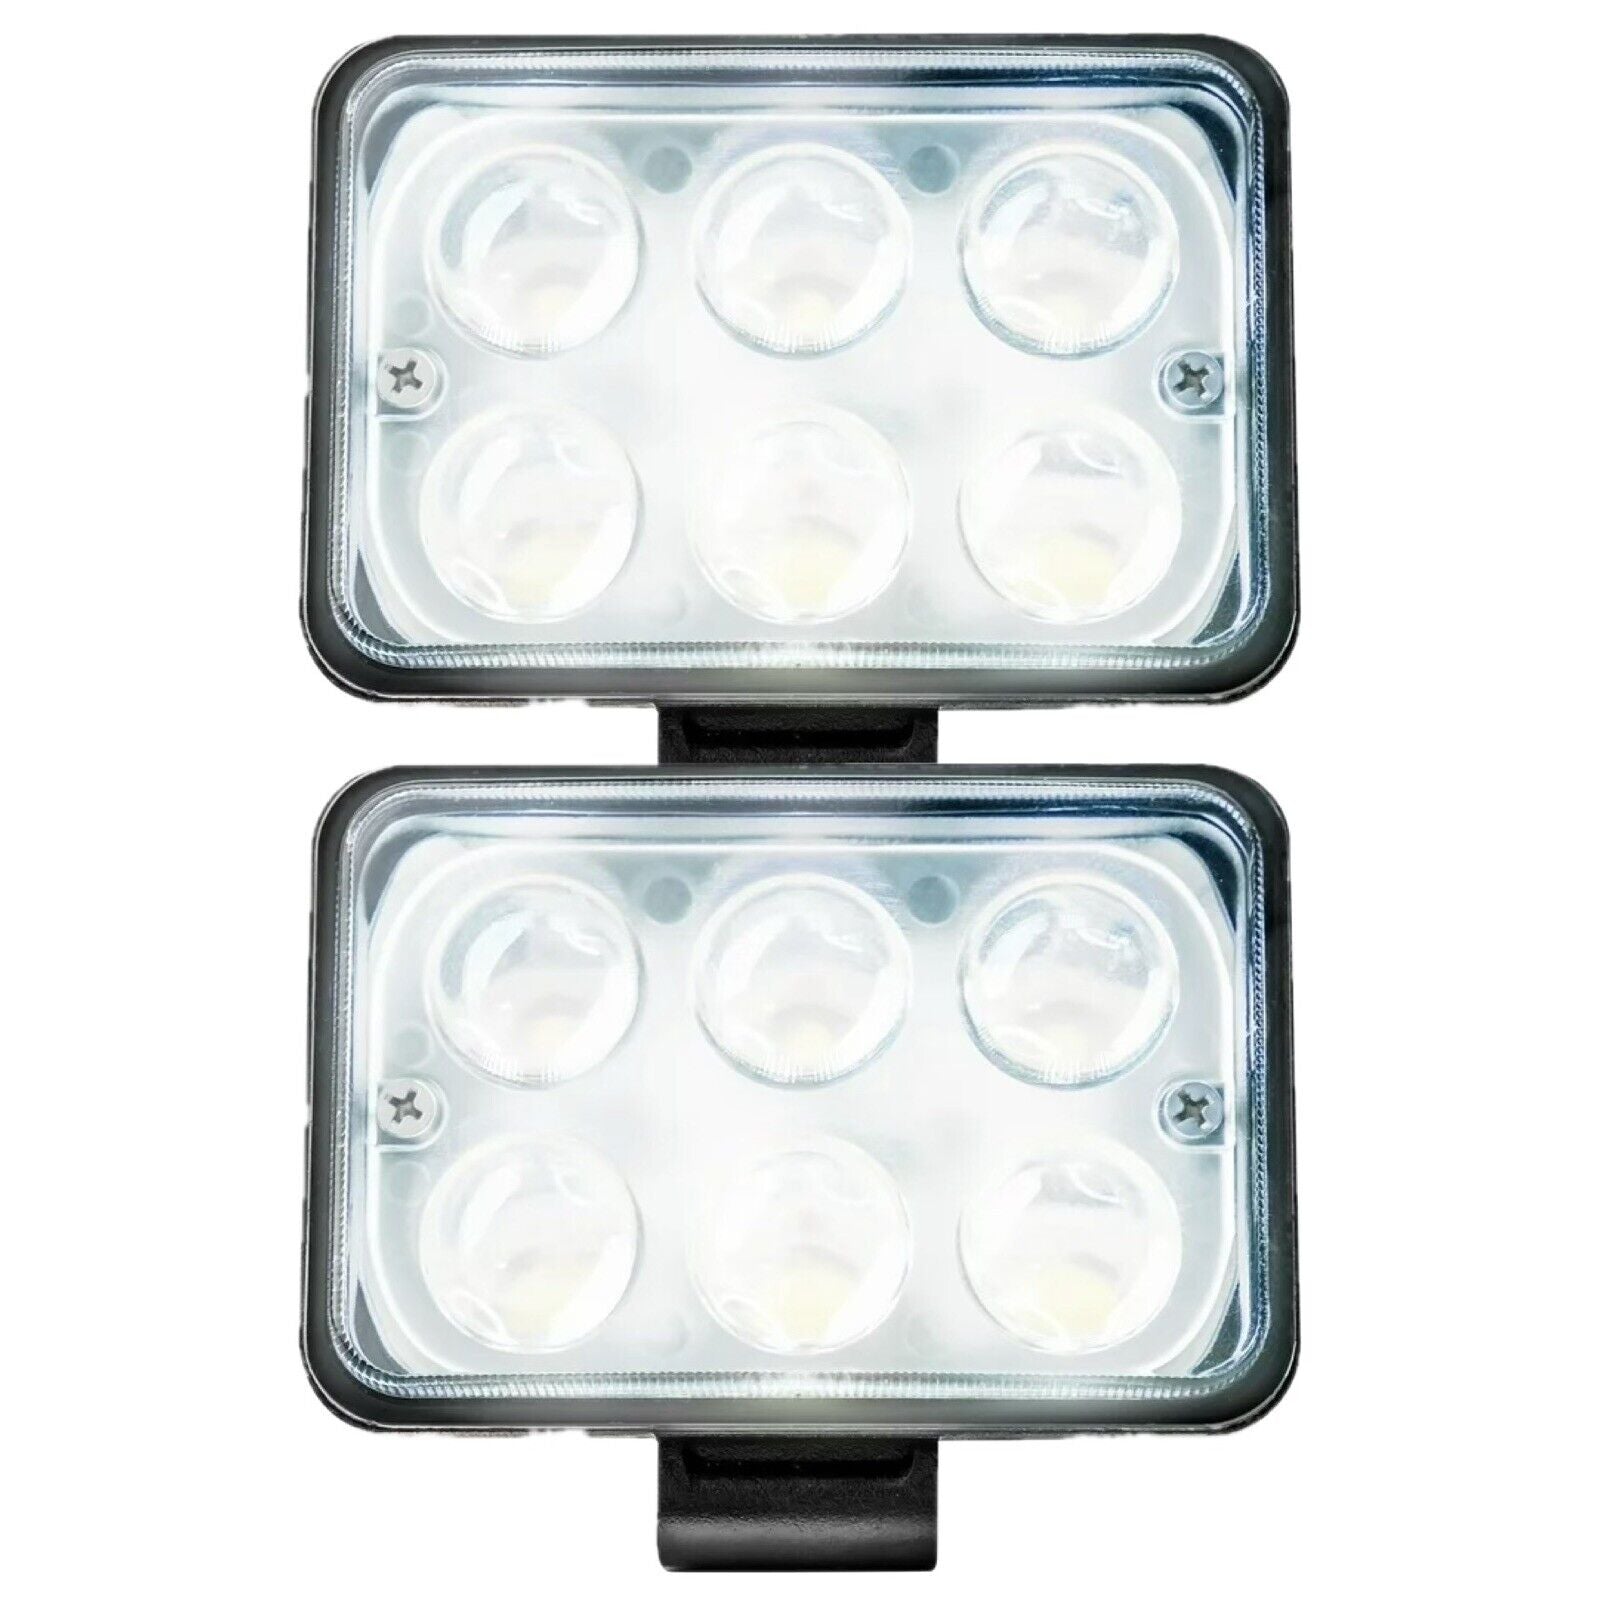 2 Pack Alpena LED Spotranger Auxiliary Driving Spotlights, 77617, Universal Fit